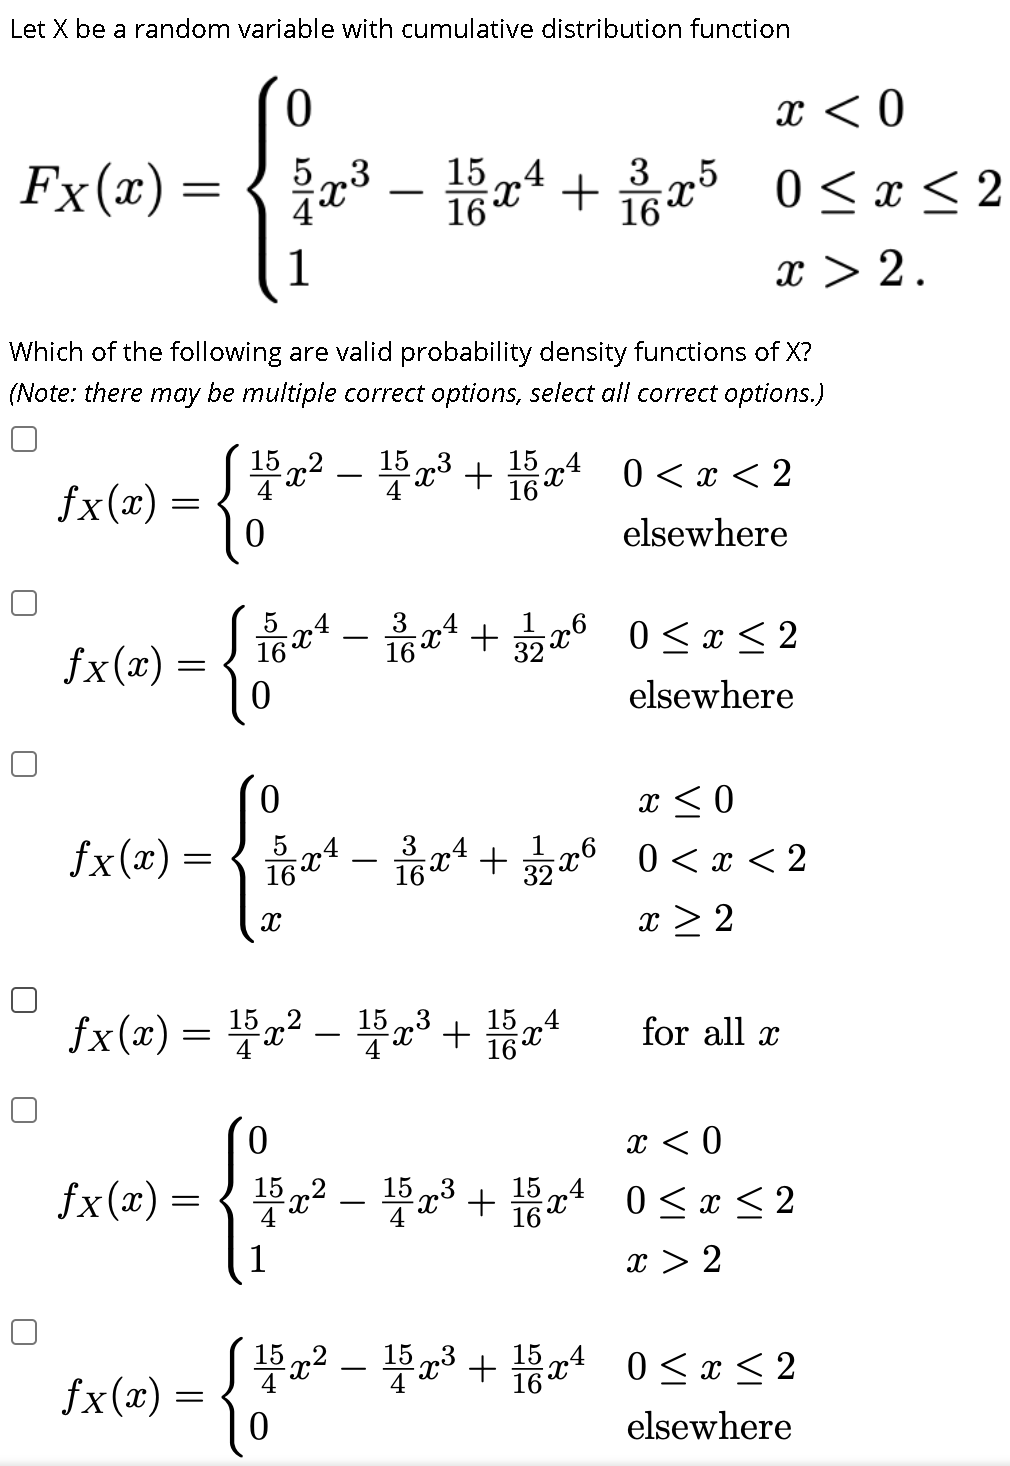 Let X be a random variable with cumulative distribution function
ㅇ
x < 0
15 .4
16
Fx(x) =
5 „3
x* +
16
3
5
0 < x < 2
1
x > 2.
Which of the following are valid probability density functions of X?
(Note: there may be multiple correct options, select all correct options.)
x? - 3 + xª 0 <x < 2
15
.4
15 x* 0 <x < 2
fx(x) =
elsewhere
– +6 0 <x < 2
3
.4
x6 0<x < 2
16
-
fx(x) =
elsewhere
x < 0
fx(x) =
16t
oad-유z4 + a6 0<z<2
9x6 0<x < 2
x > 2
fx(x) = Fa² – Ha3+
15
x° +
15 „4
16X
for all x
-
x < 0
P? - 3 + 0< x < 2
15
.4
fx(x) =
16
1
x > 2
Sa2 - Fa3 + x4
15
16
0 < x < 2
fx(x) =
elsewhere
